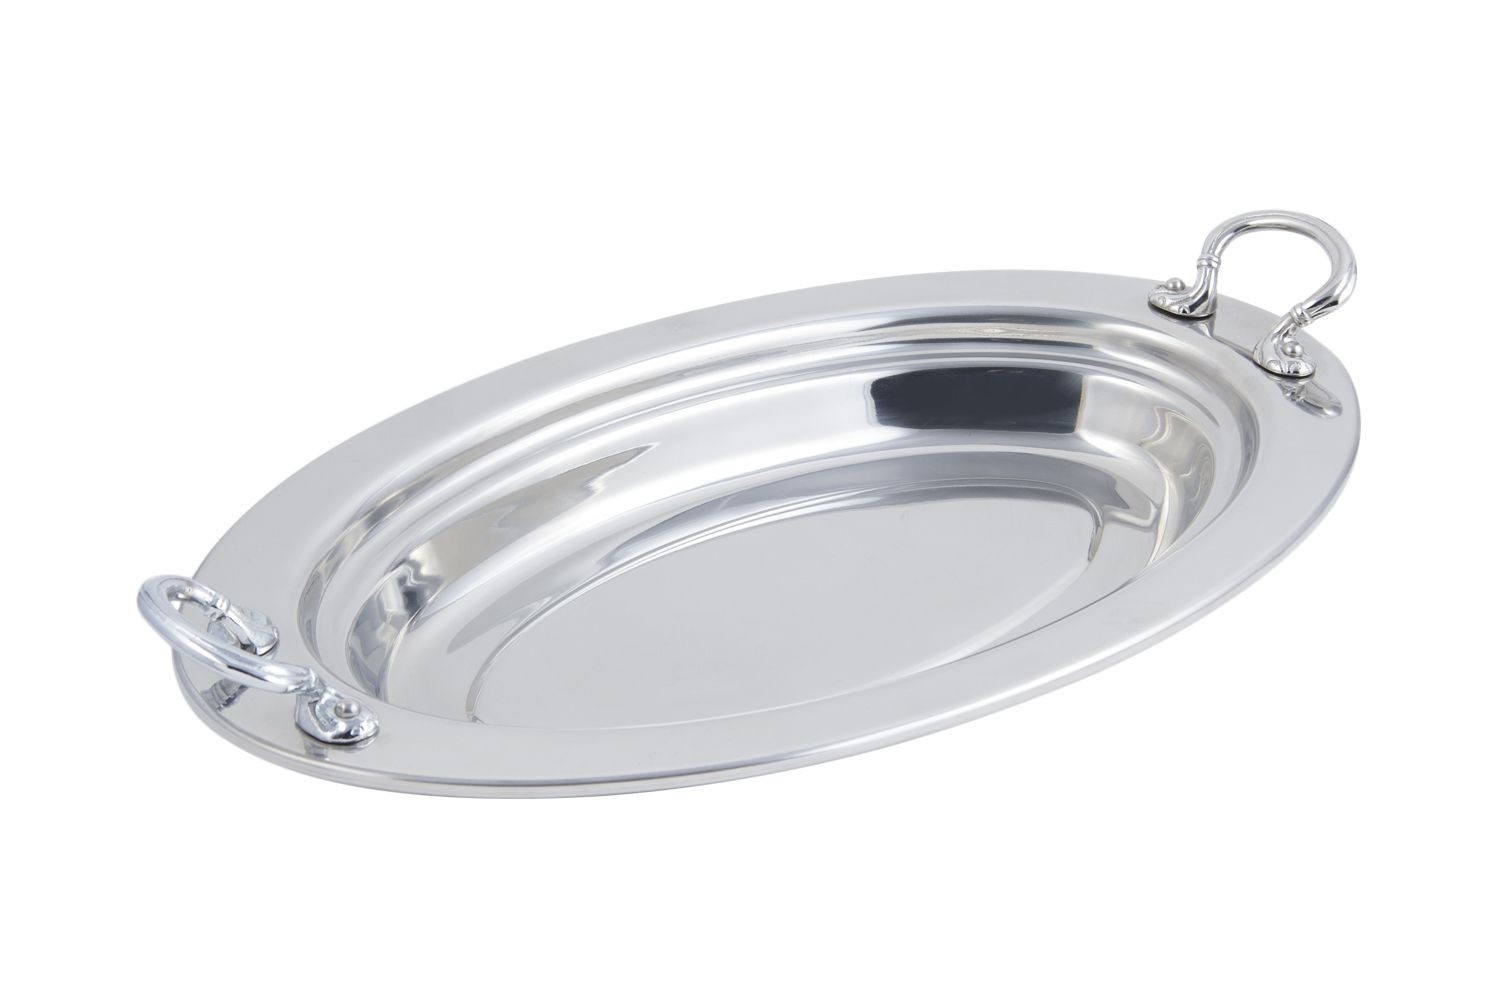 Bon Chef 5288HRSS Plain Design Oval Pan with Round Stainless Steel Handles, 2 1/2 Qt.